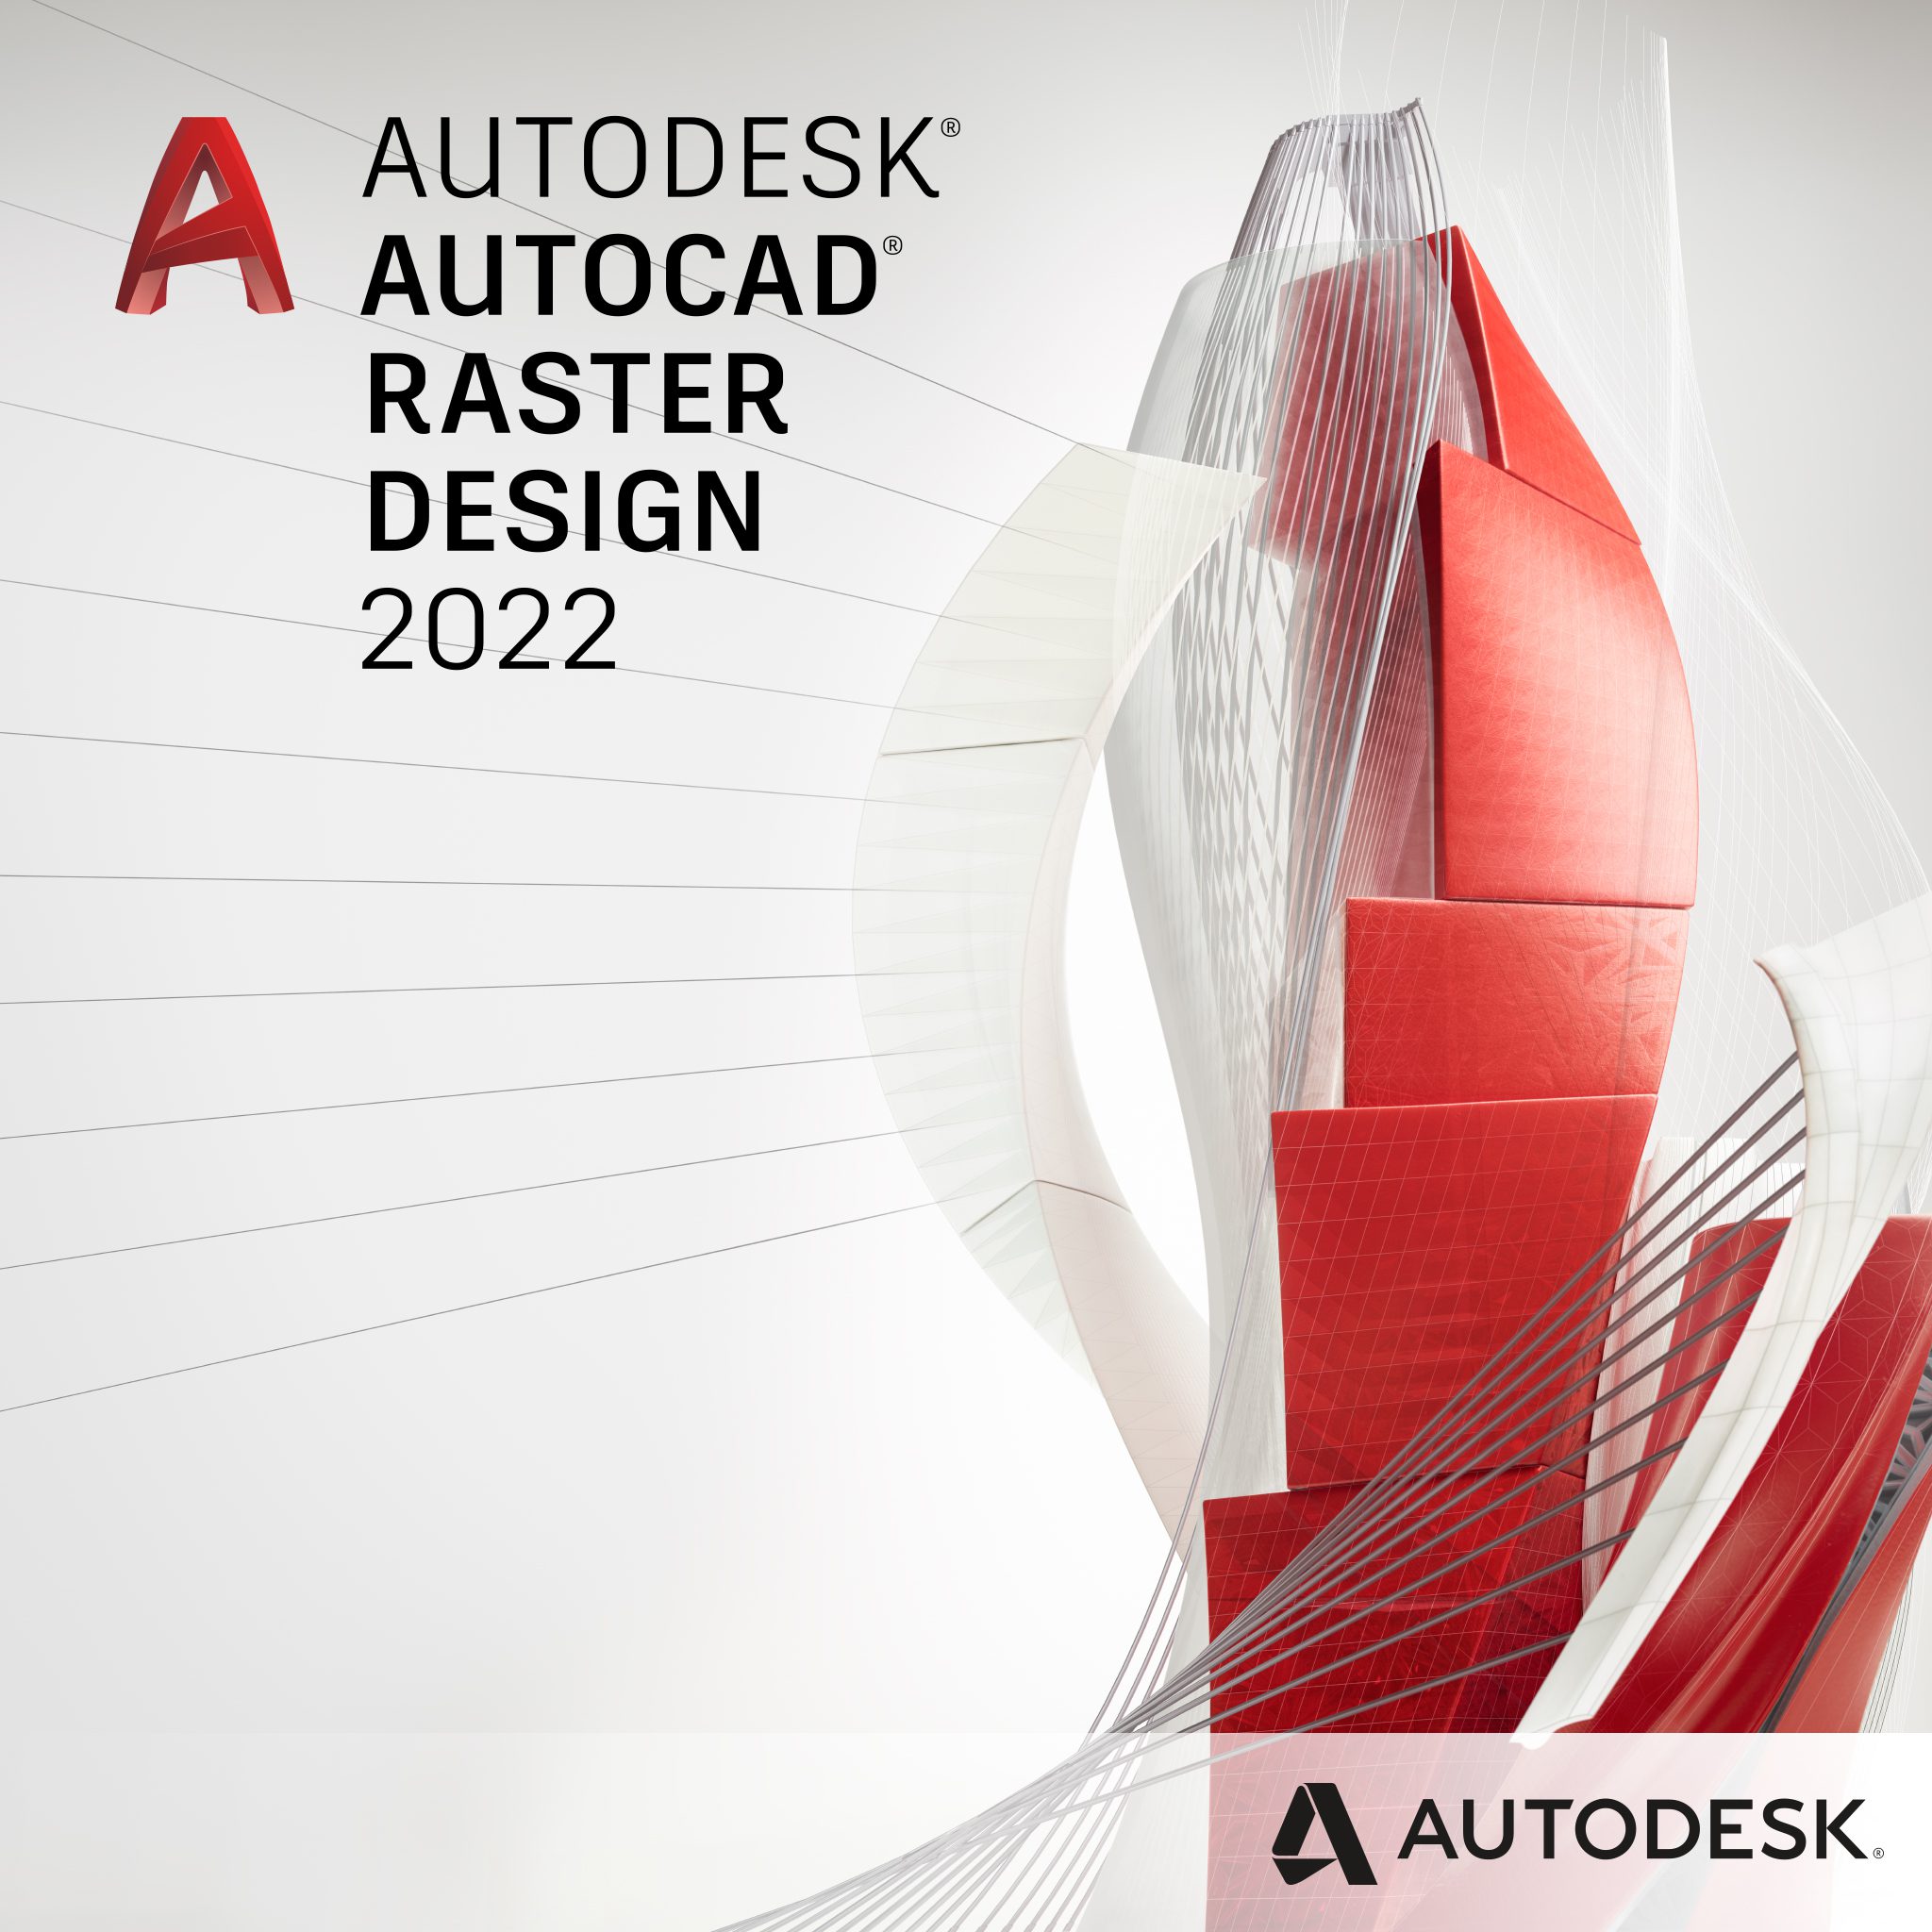 Autodesk AutoCAD Raster Design 2022: Powerful software for converting raster images into editable vector formats.